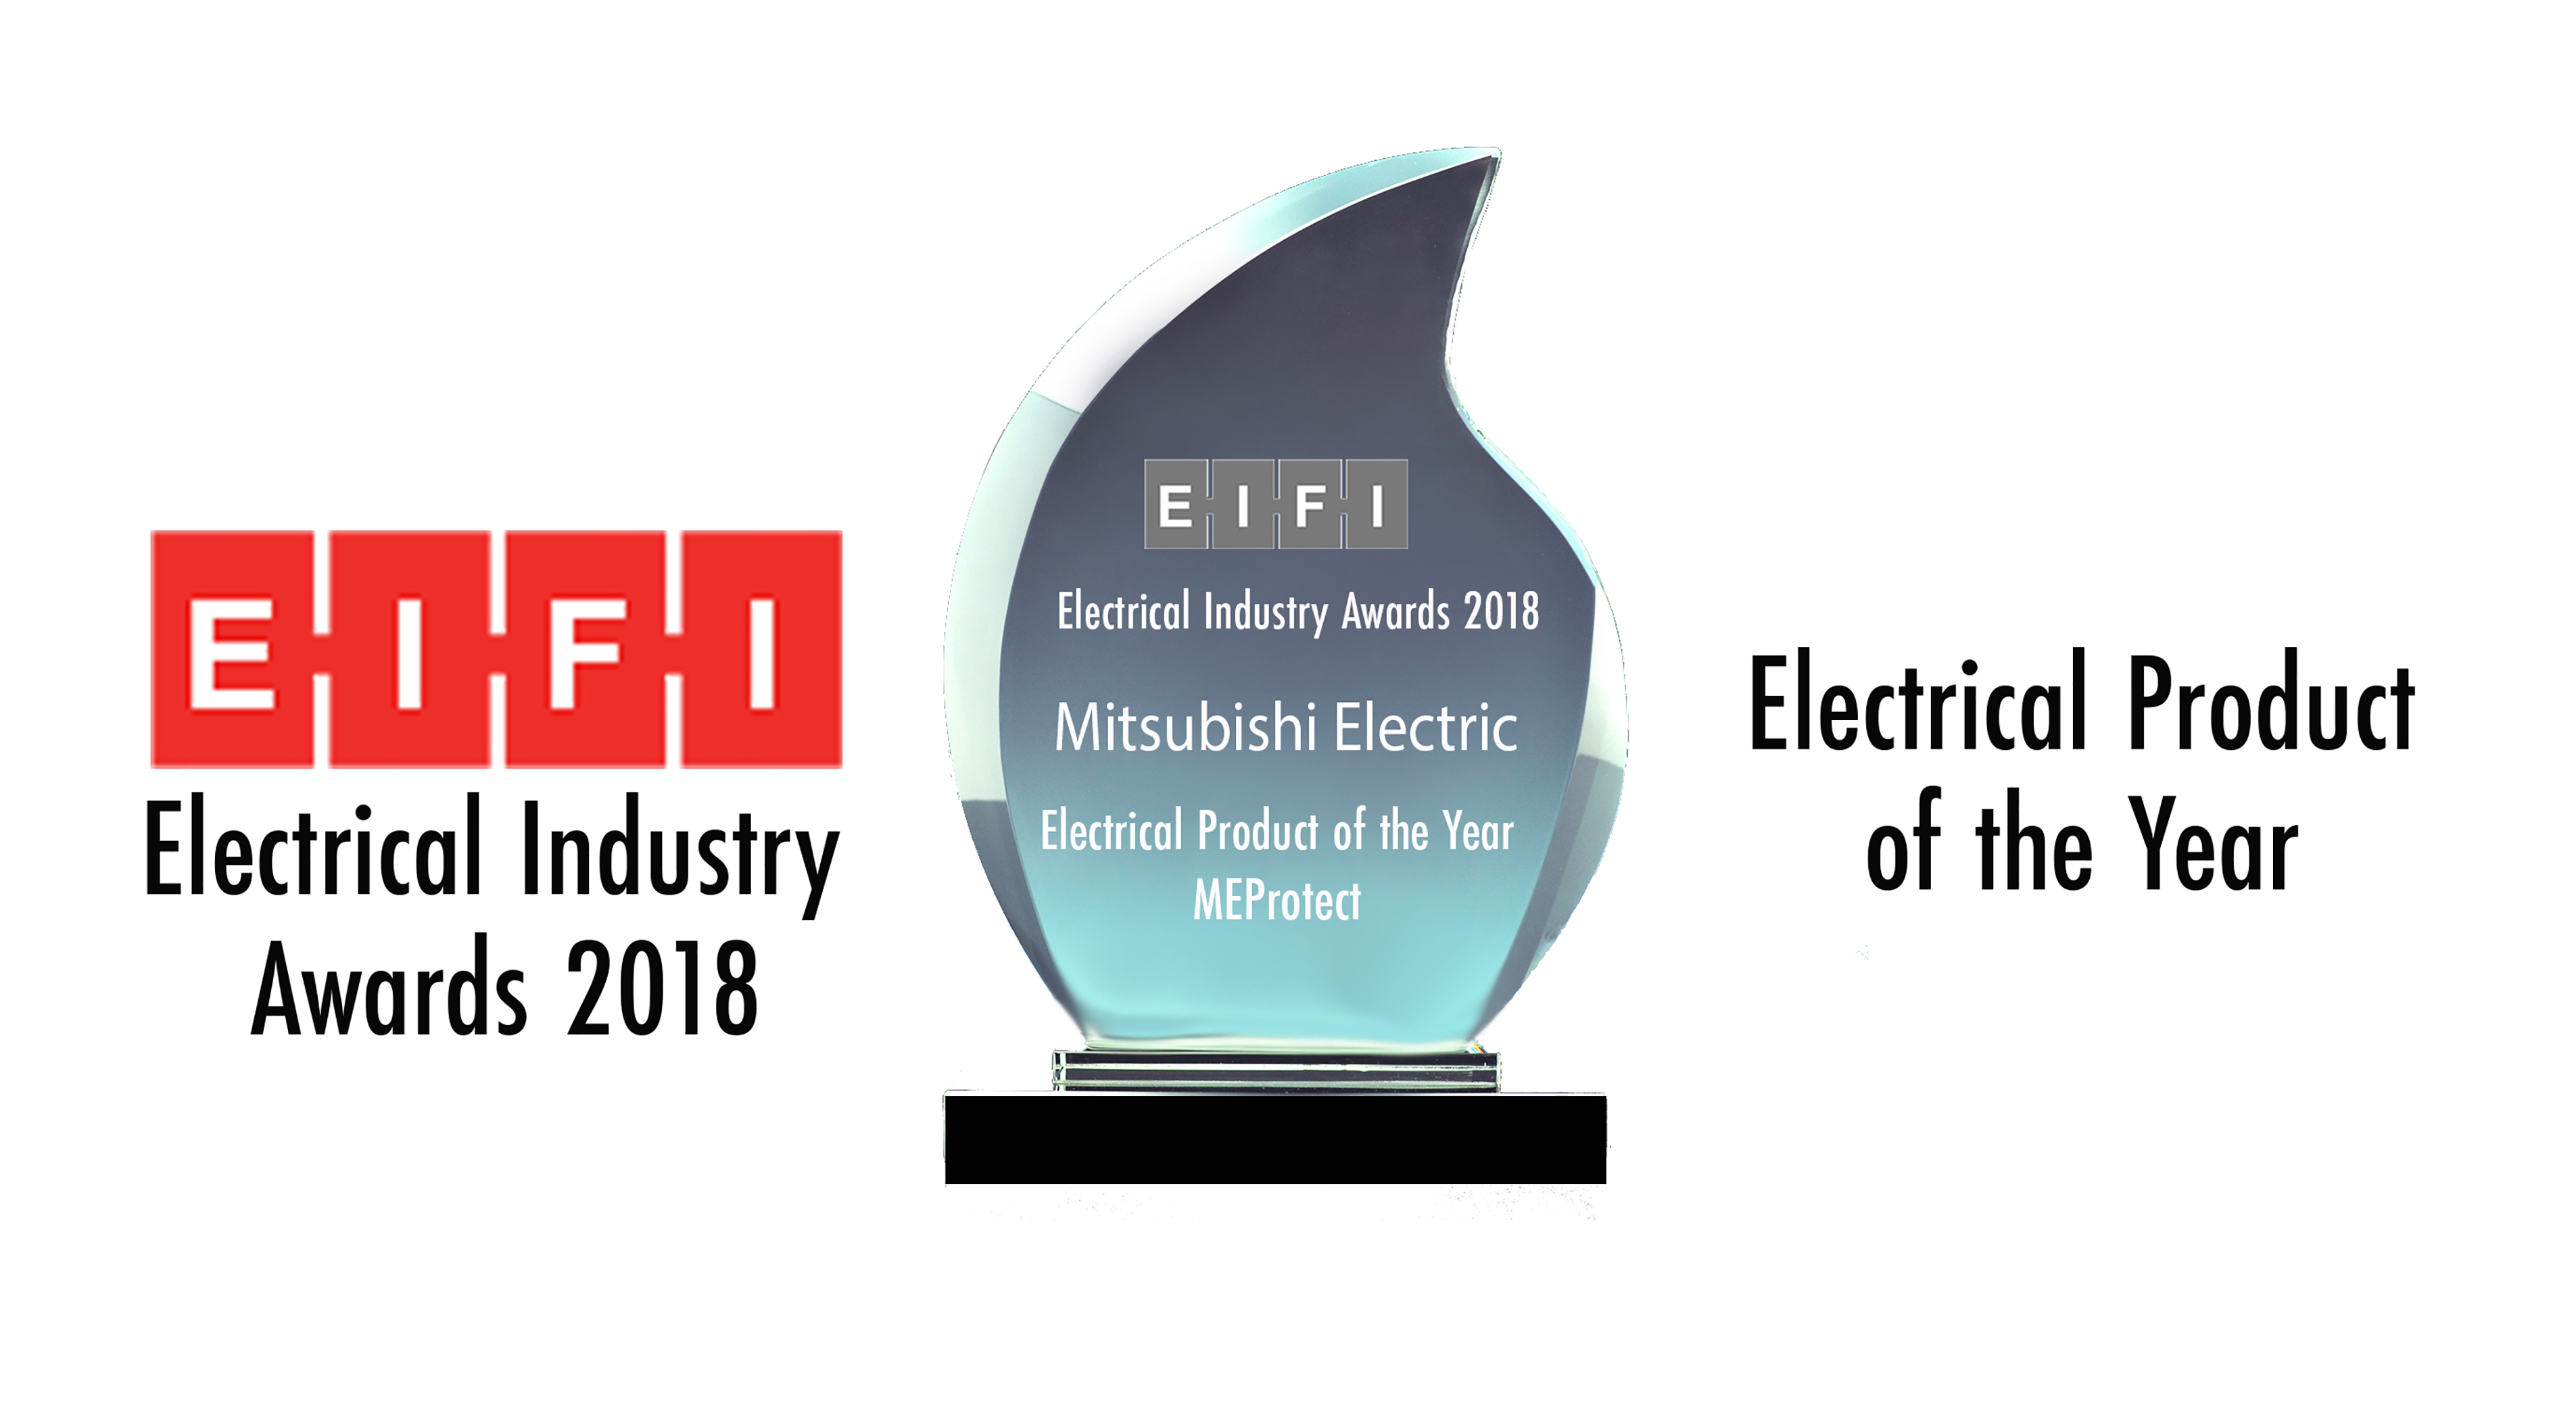 Image shows the EIFI award winning MEprotect digital protection relay. The team from Mitsubishi Electric Ireland believes this product could improve services and efficiency for general businesses and save thousands in downtime.